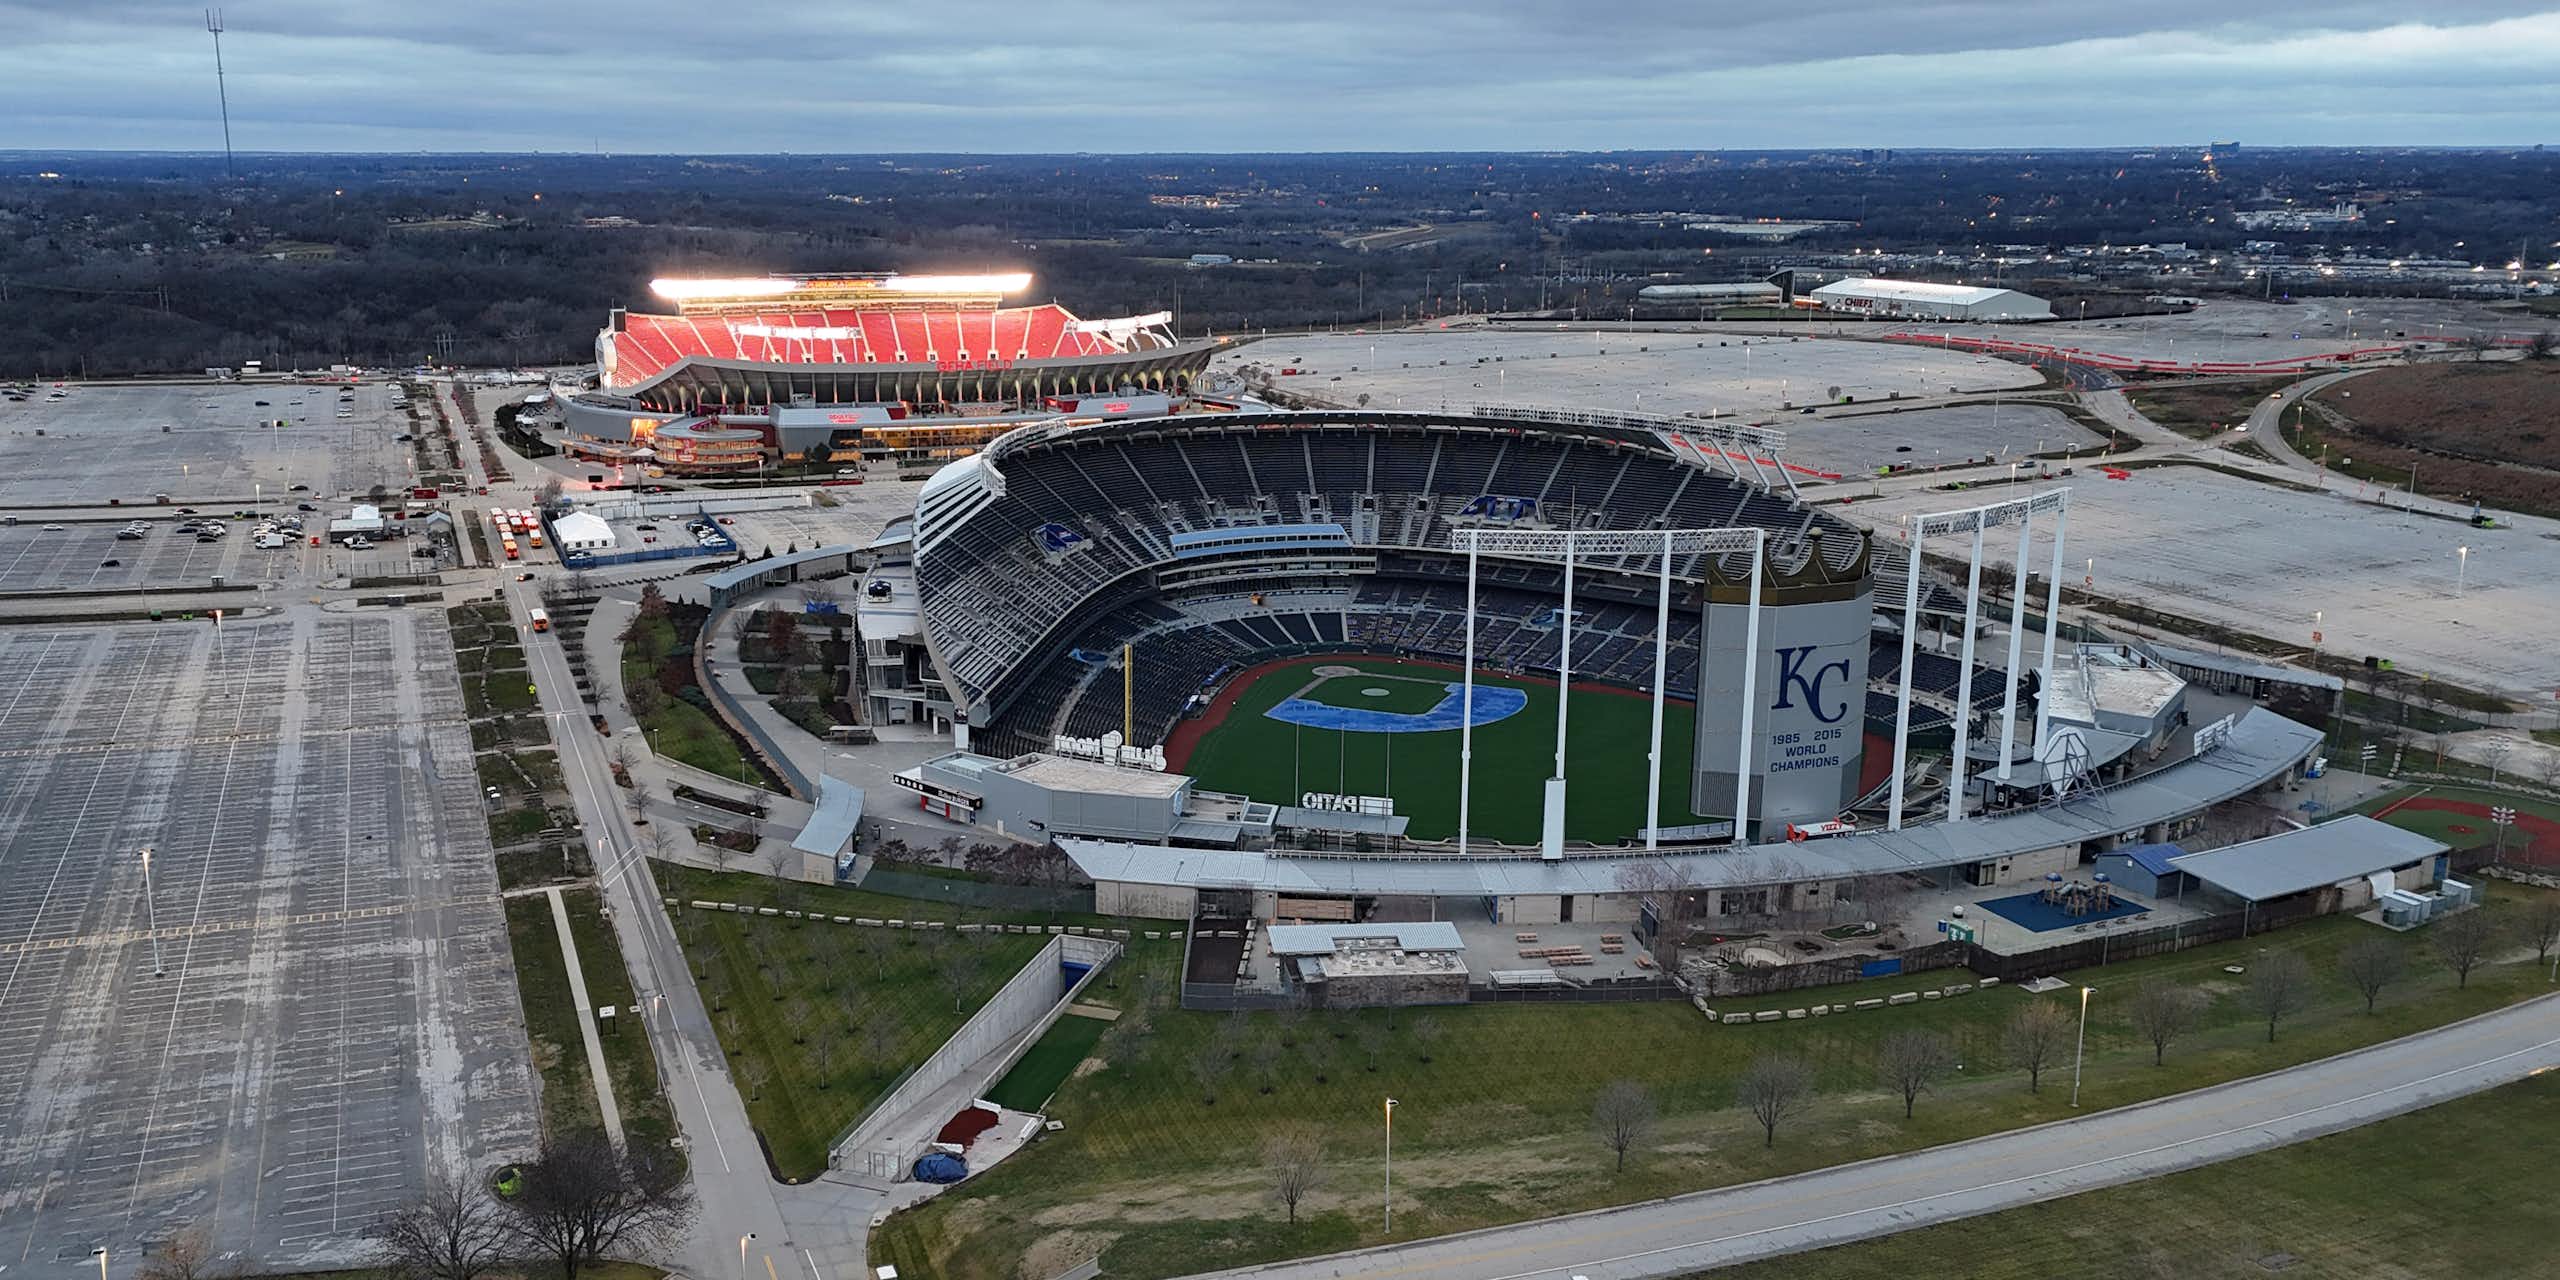 An aerial view of a baseball stadium and football stadium near one another.